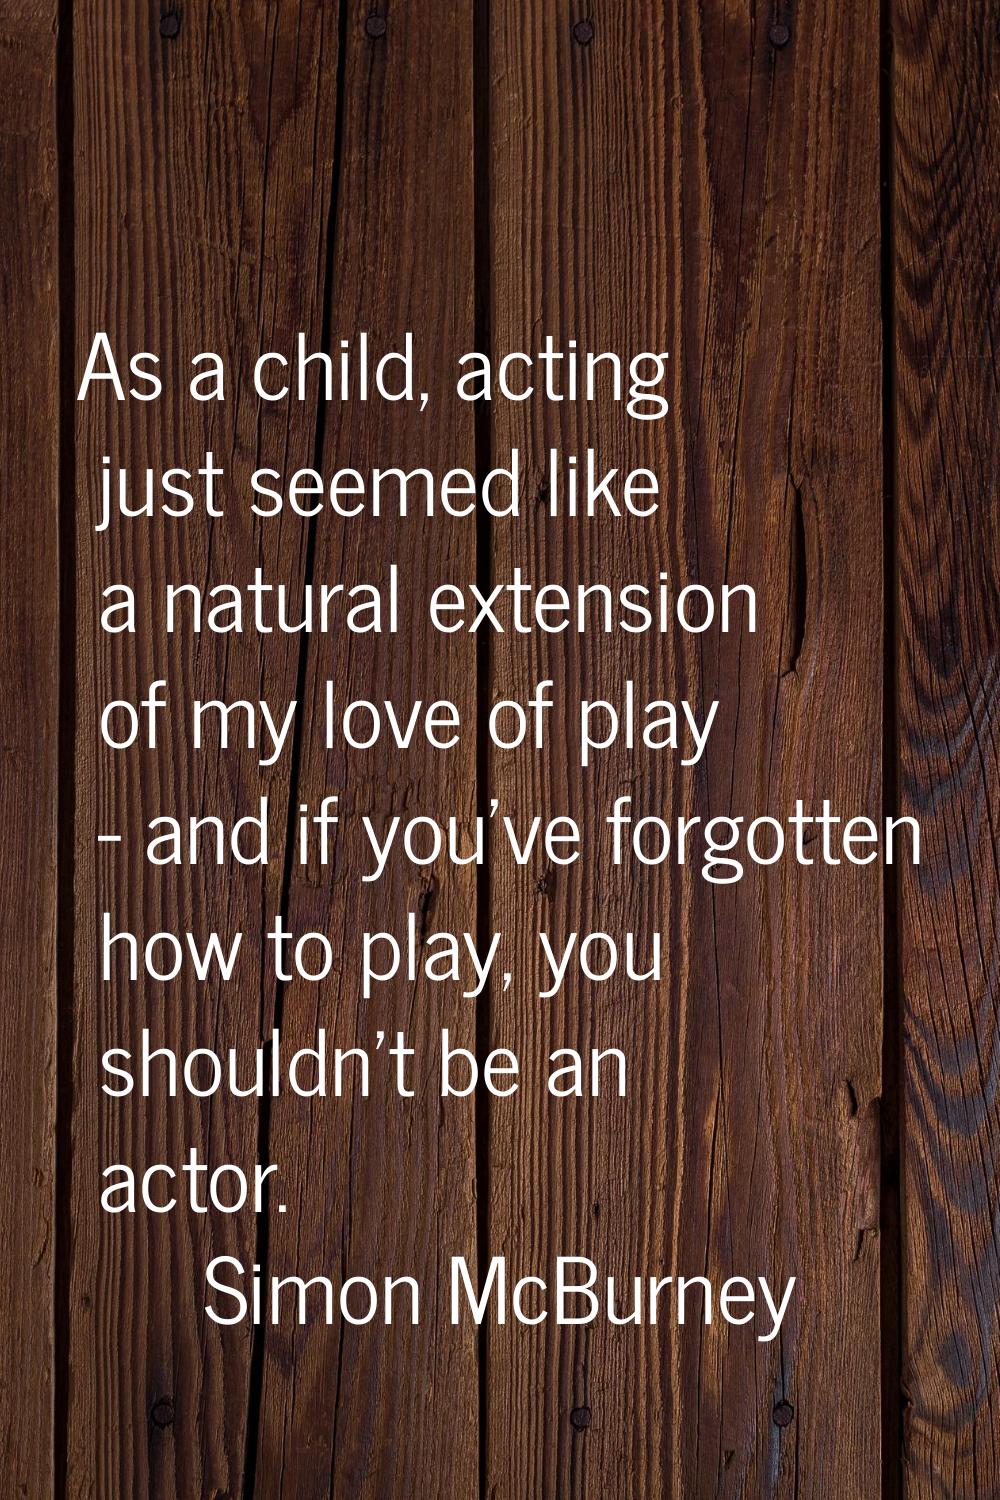 As a child, acting just seemed like a natural extension of my love of play - and if you've forgotte